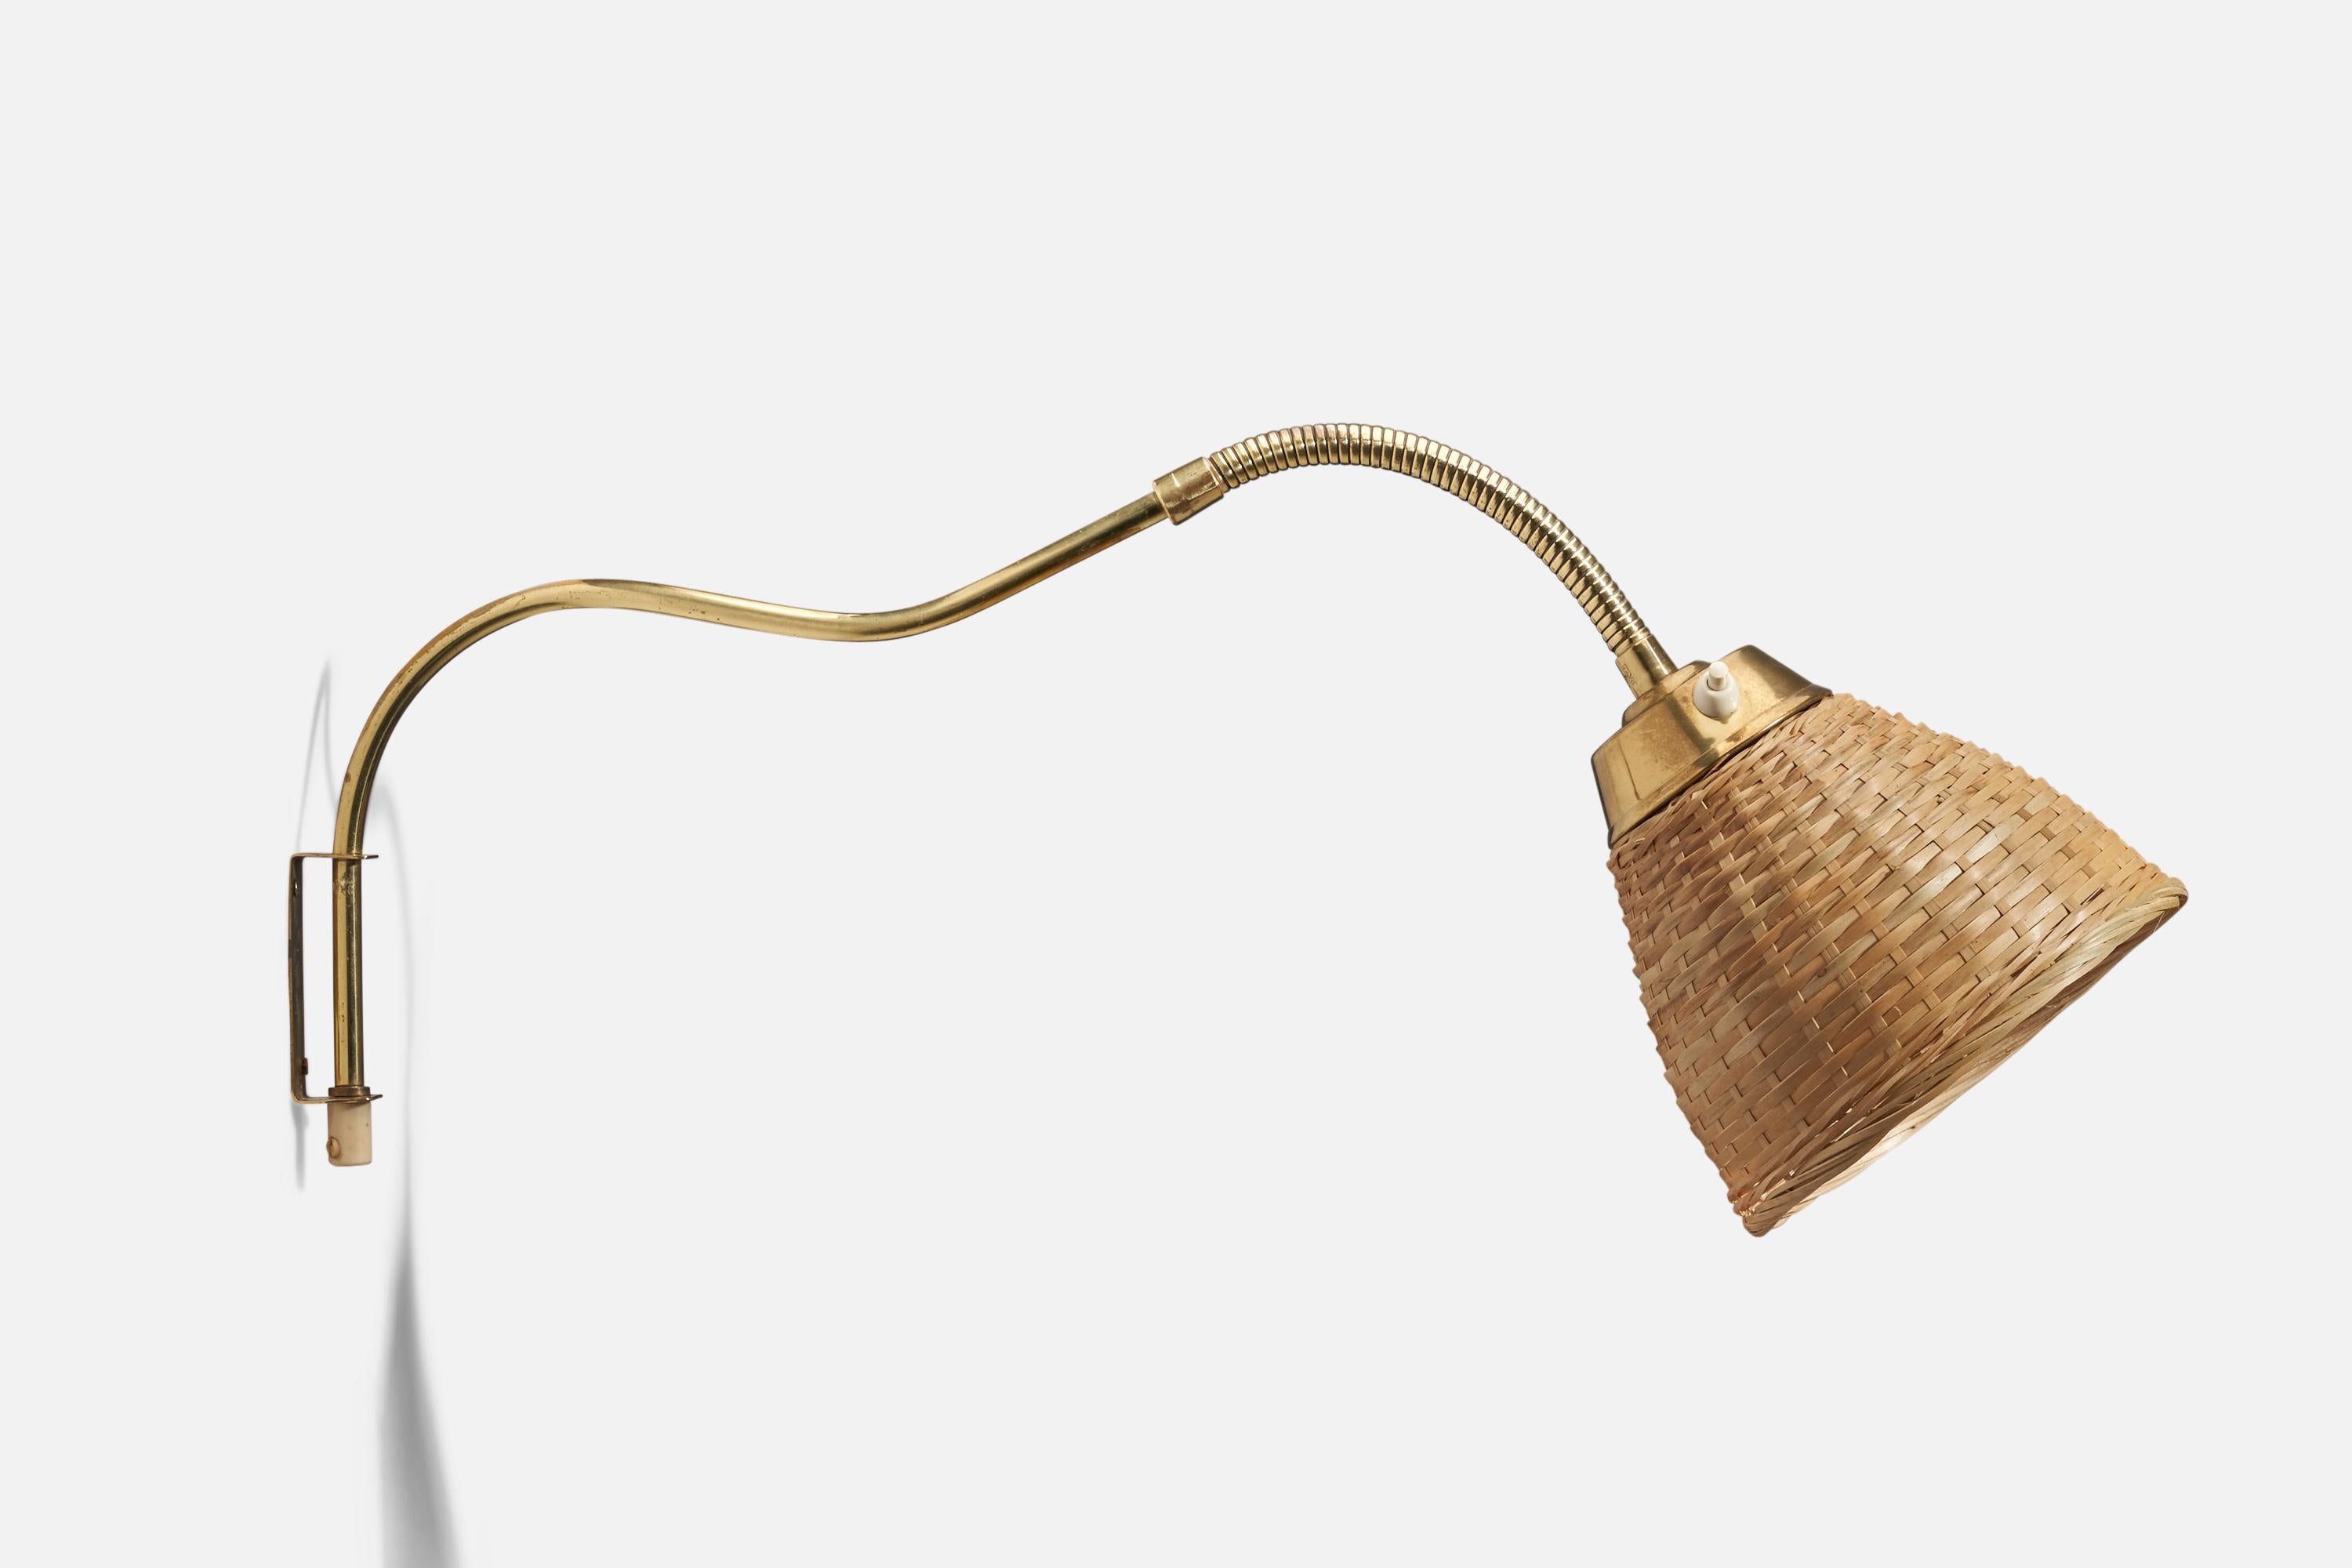 A brass and rattan wall light designed and produced in Sweden, 1940s

Takes one lightbulb on E26 socket. No stated max wattage, not UL listed.

Sold with Lampshade. Dimensions stated are of Sconce with Lampshade.